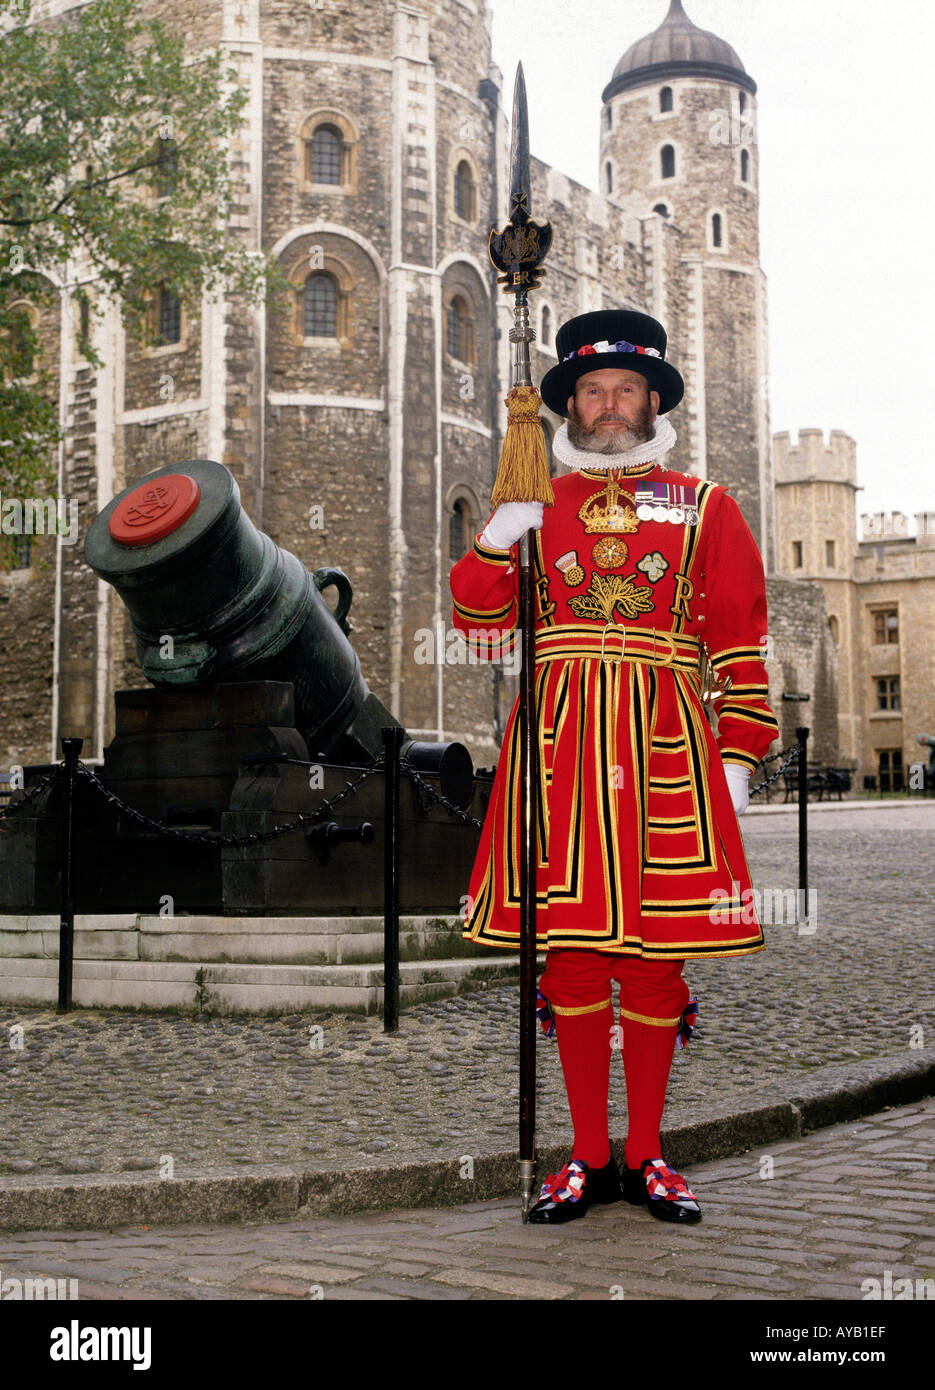 Beefeater am Tower of London Stockfoto